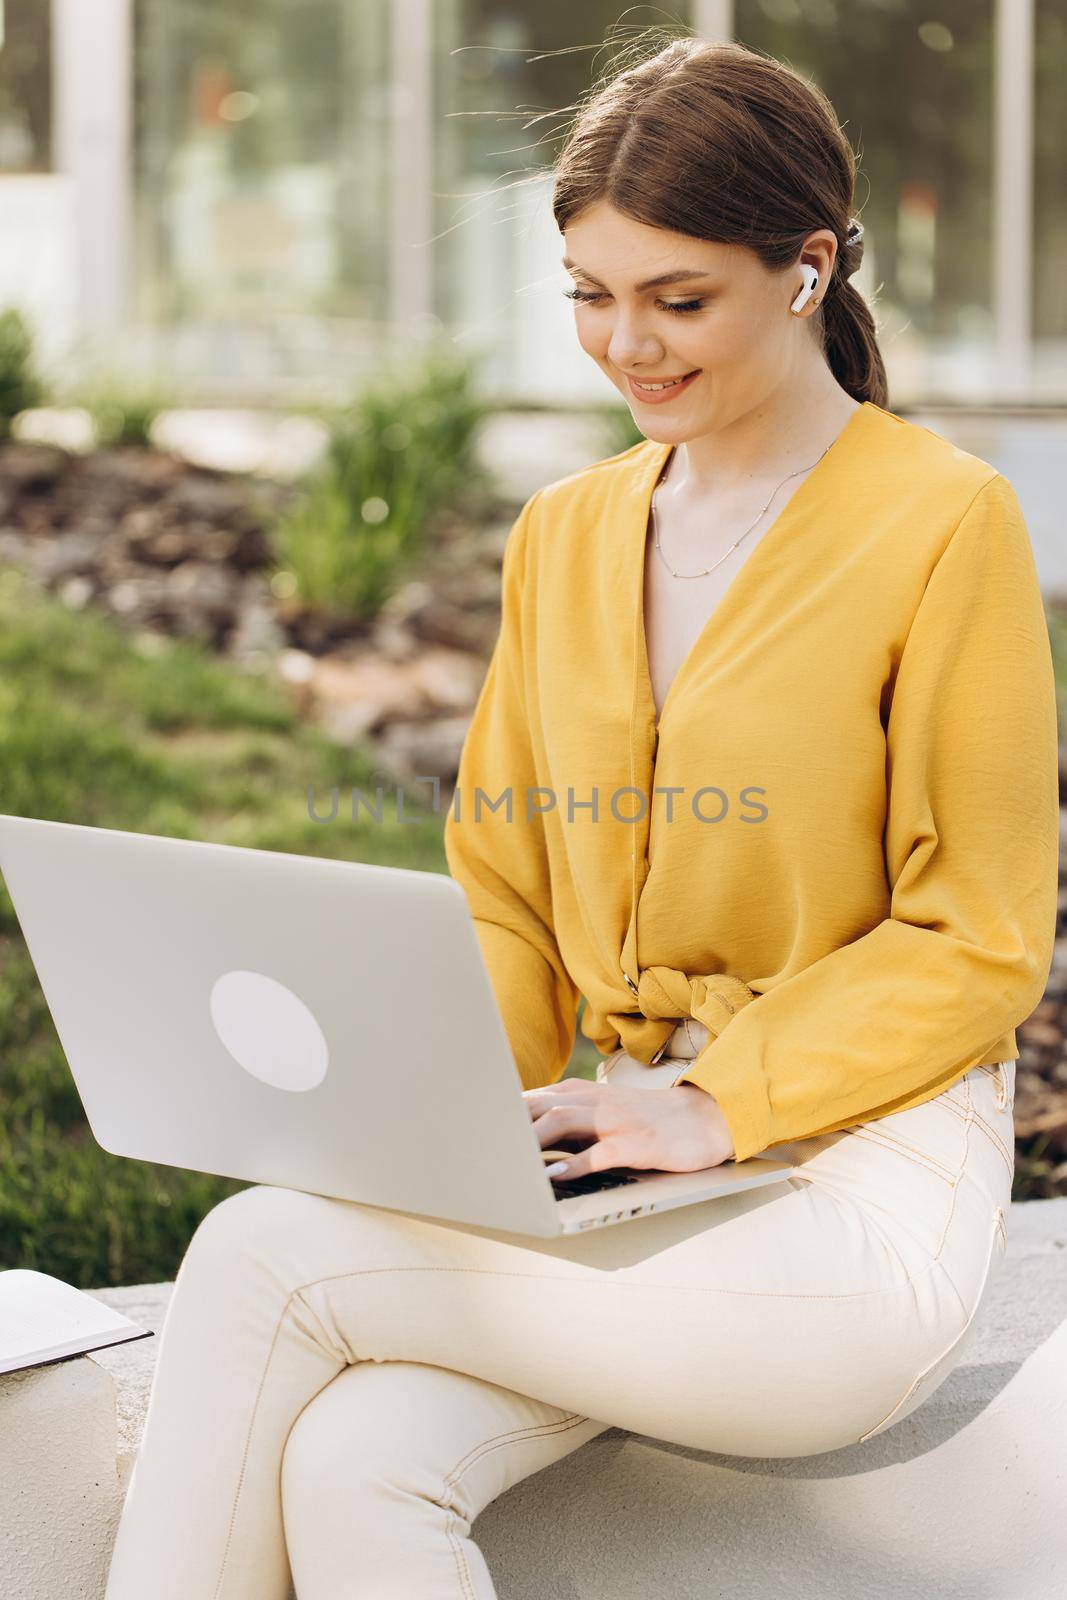 Young woman wearing earphones sitting in front open laptop computer and looking ahead. Portrait of attractive woman using laptop in coworking space. Study, remote work, learning, freelance.